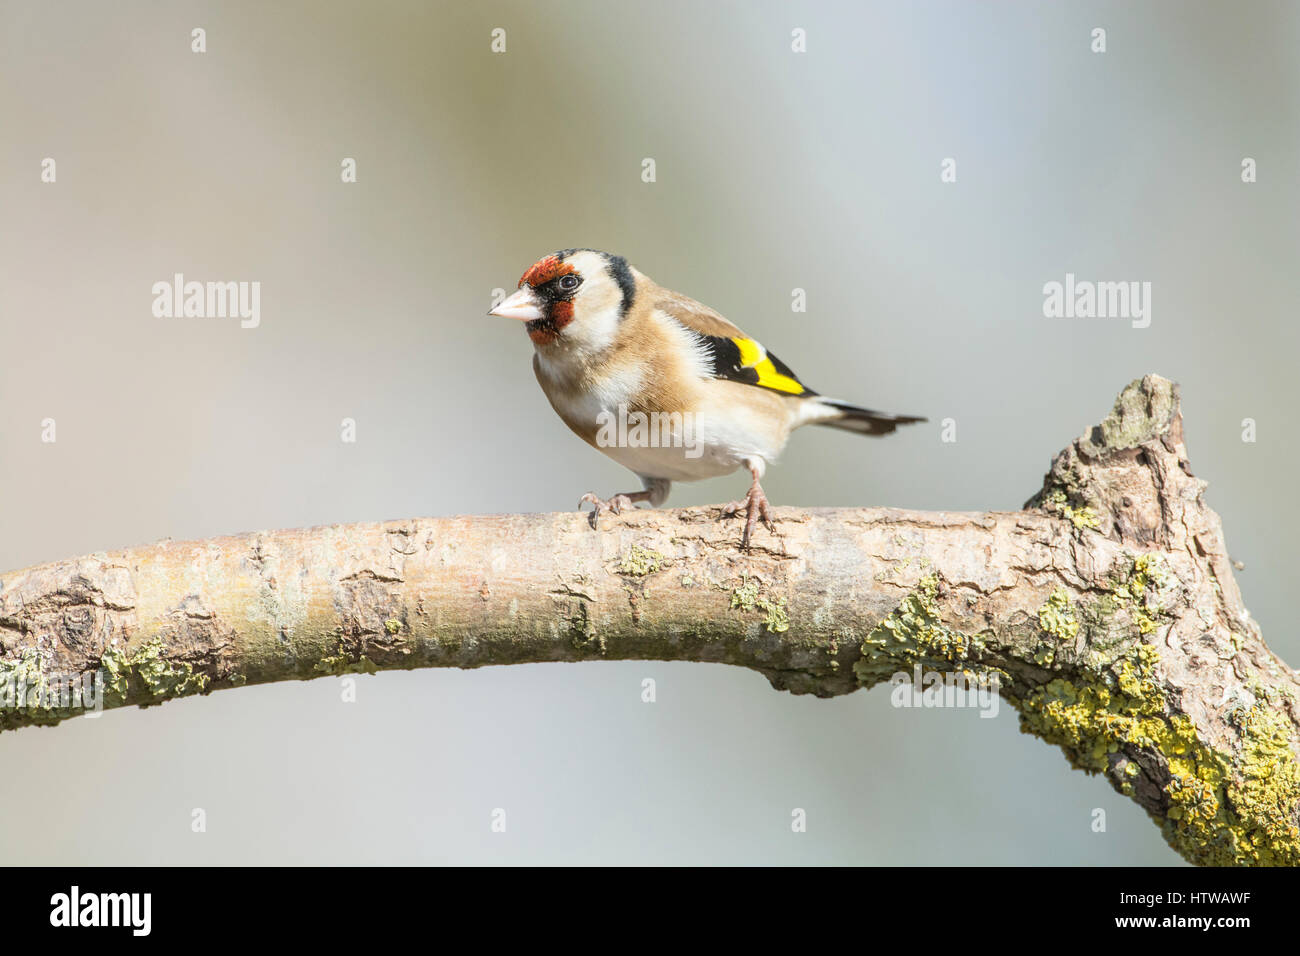 Goldfinch (Carduelis carduelis) perched on a branch Stock Photo